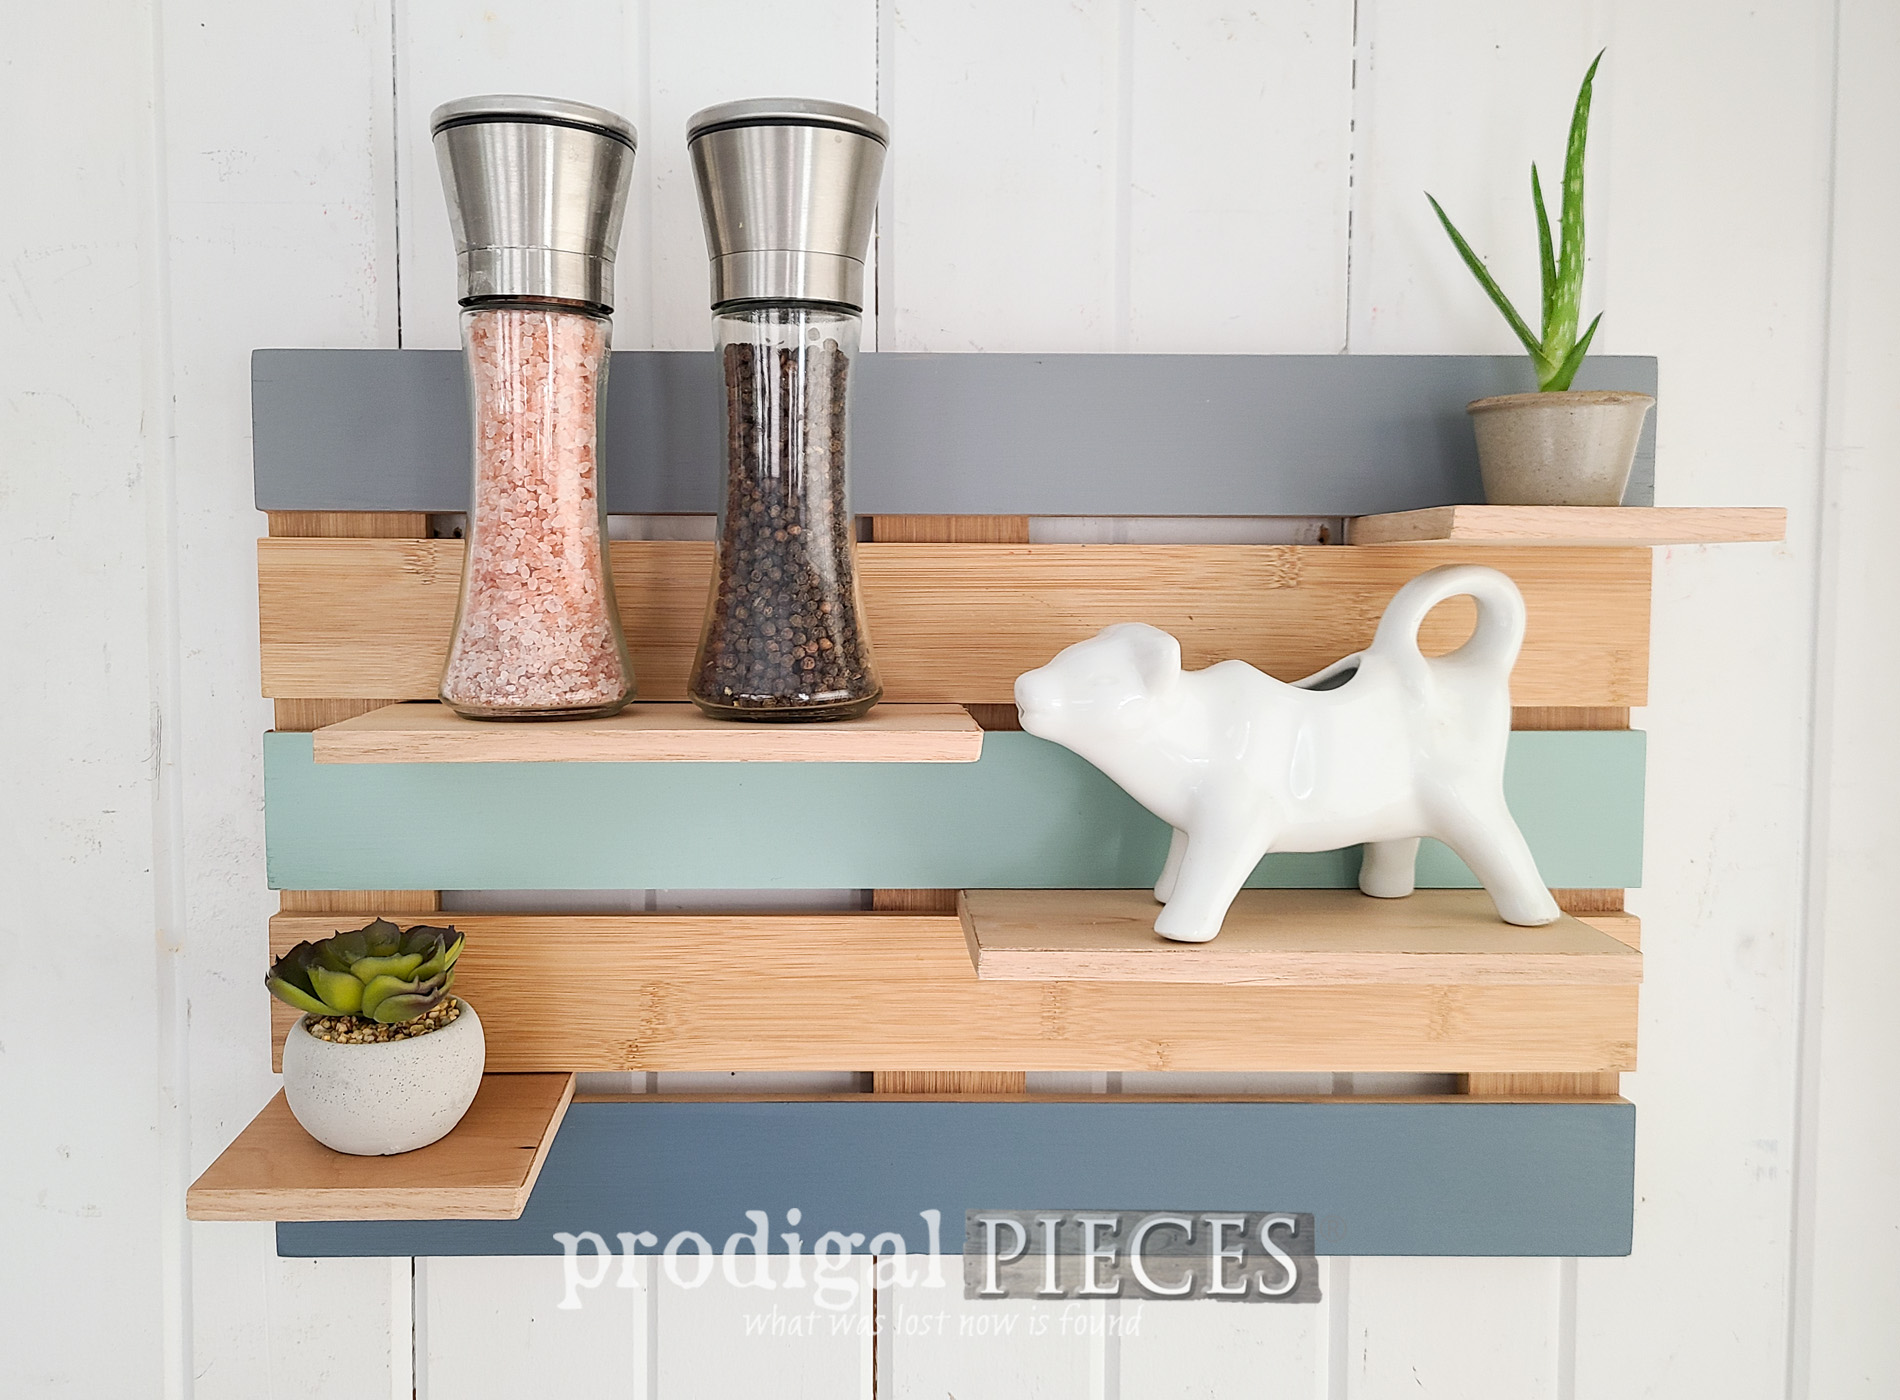 Featured Repurposed Trivet into Wall Decor with Accessories by Larissa of Prodigal Pieces | prodigalpieces.com #prodigalpieces #repurposed #diy #home #boho #modern